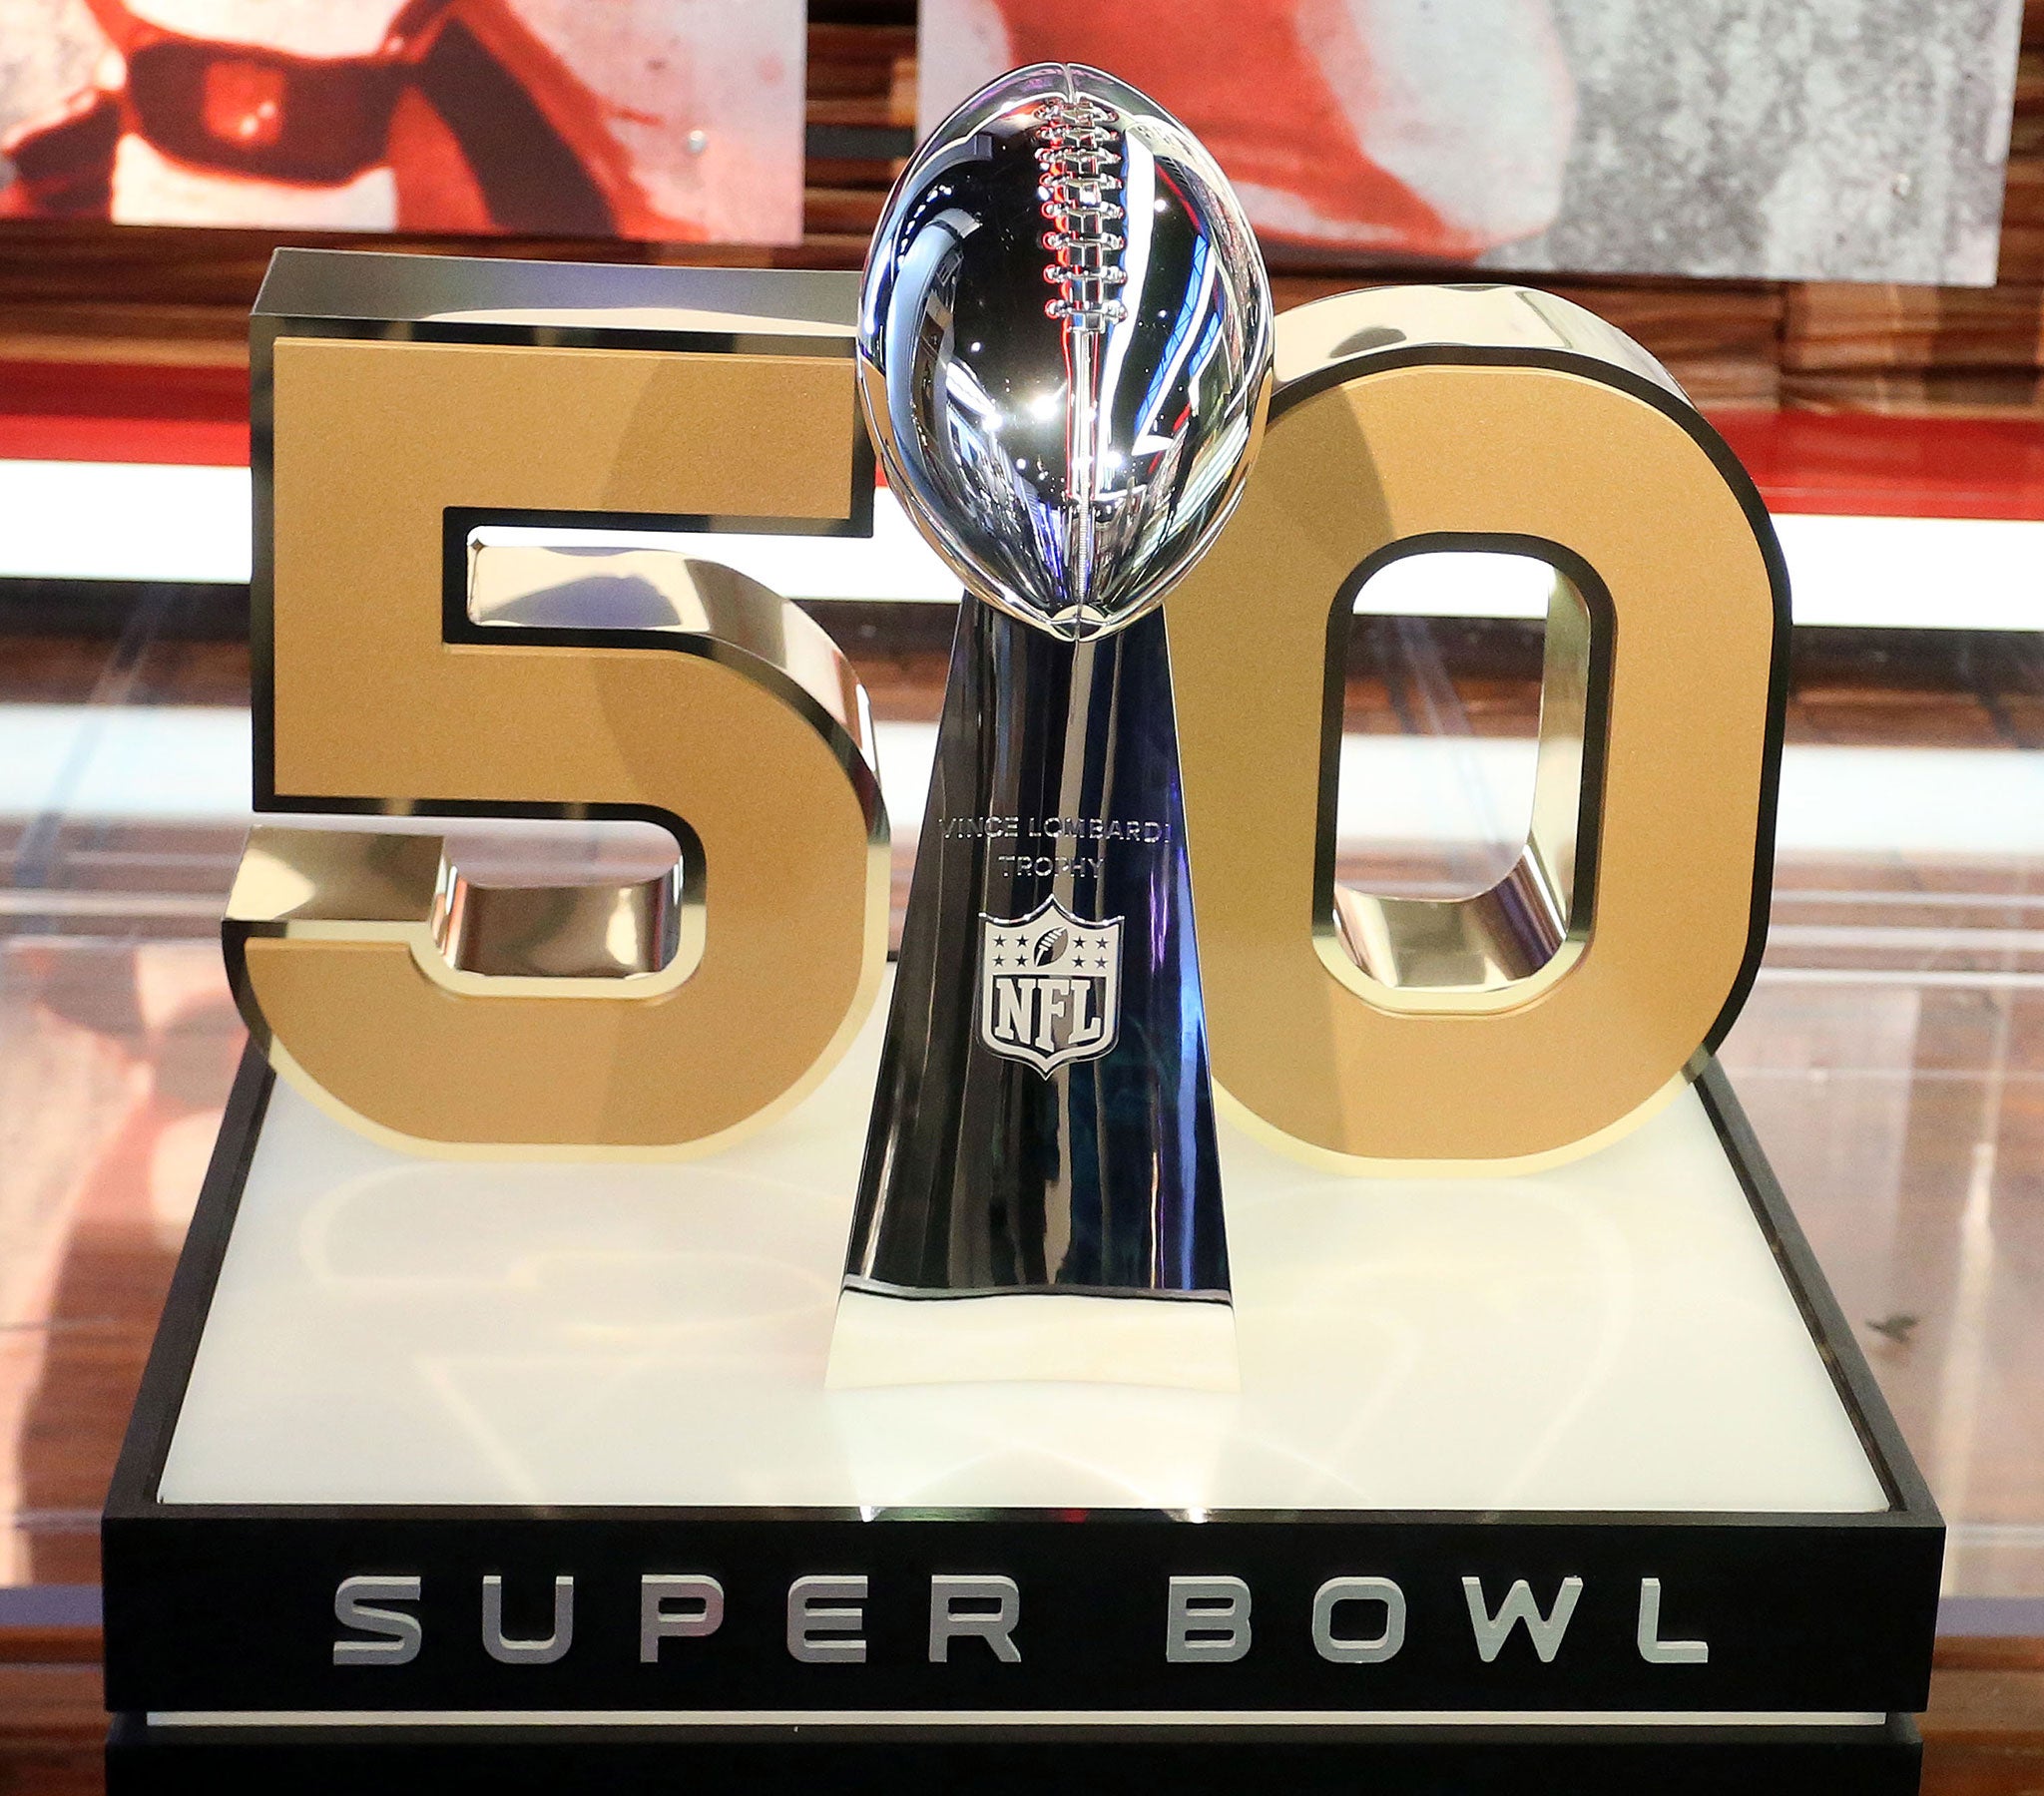 Super Bowl 50 will see the Denver Broncos face the Carolina Panthers